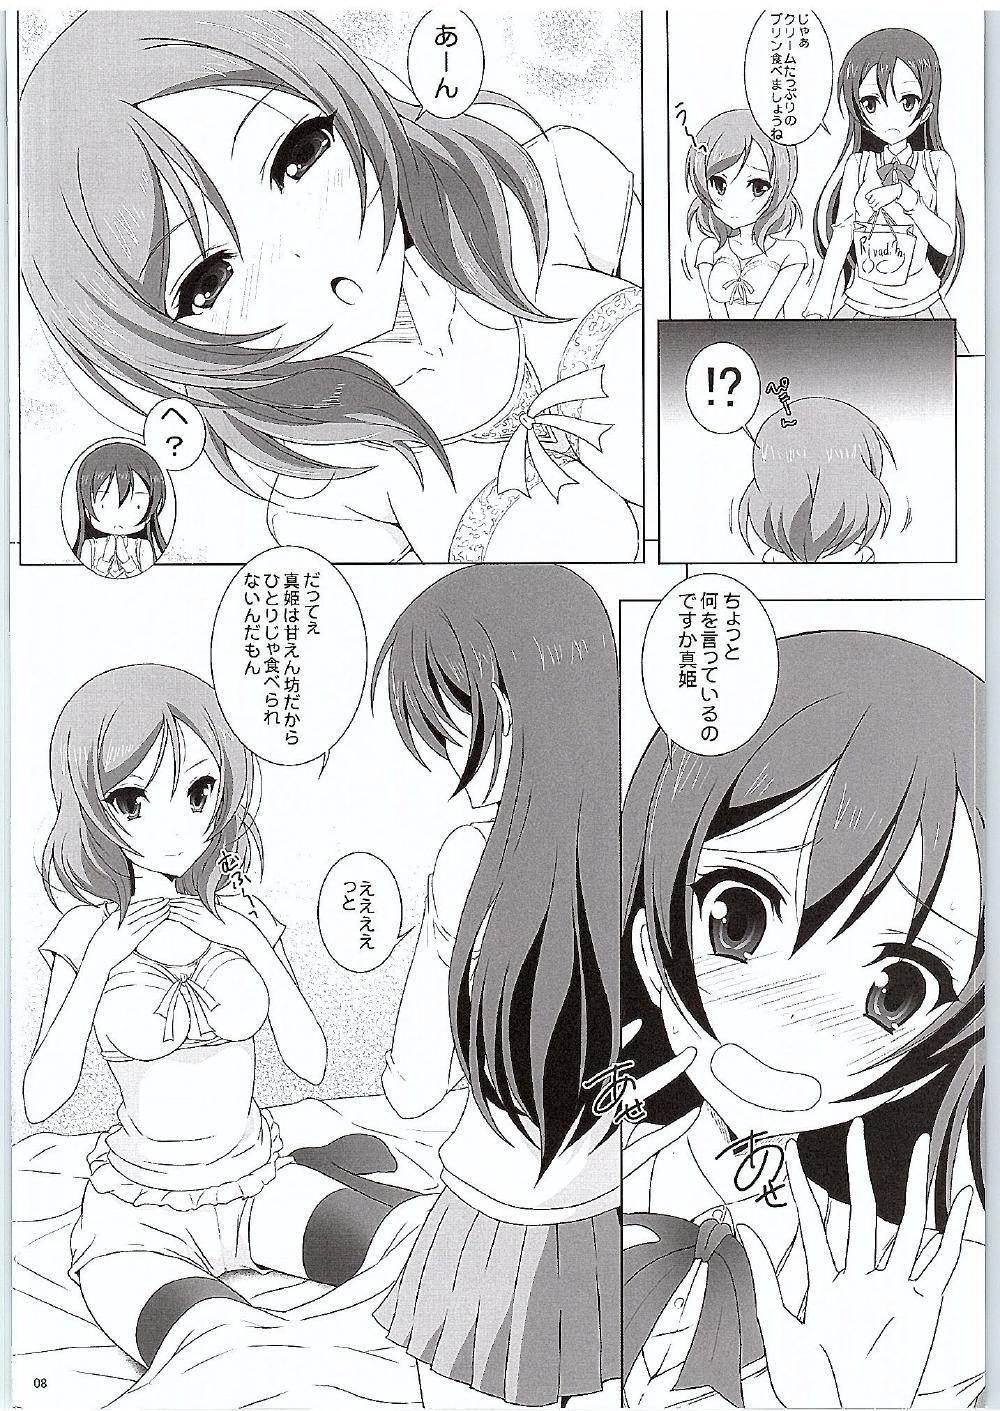 Pussyfucking UmiMaki Roll - Love live Teen - Page 7